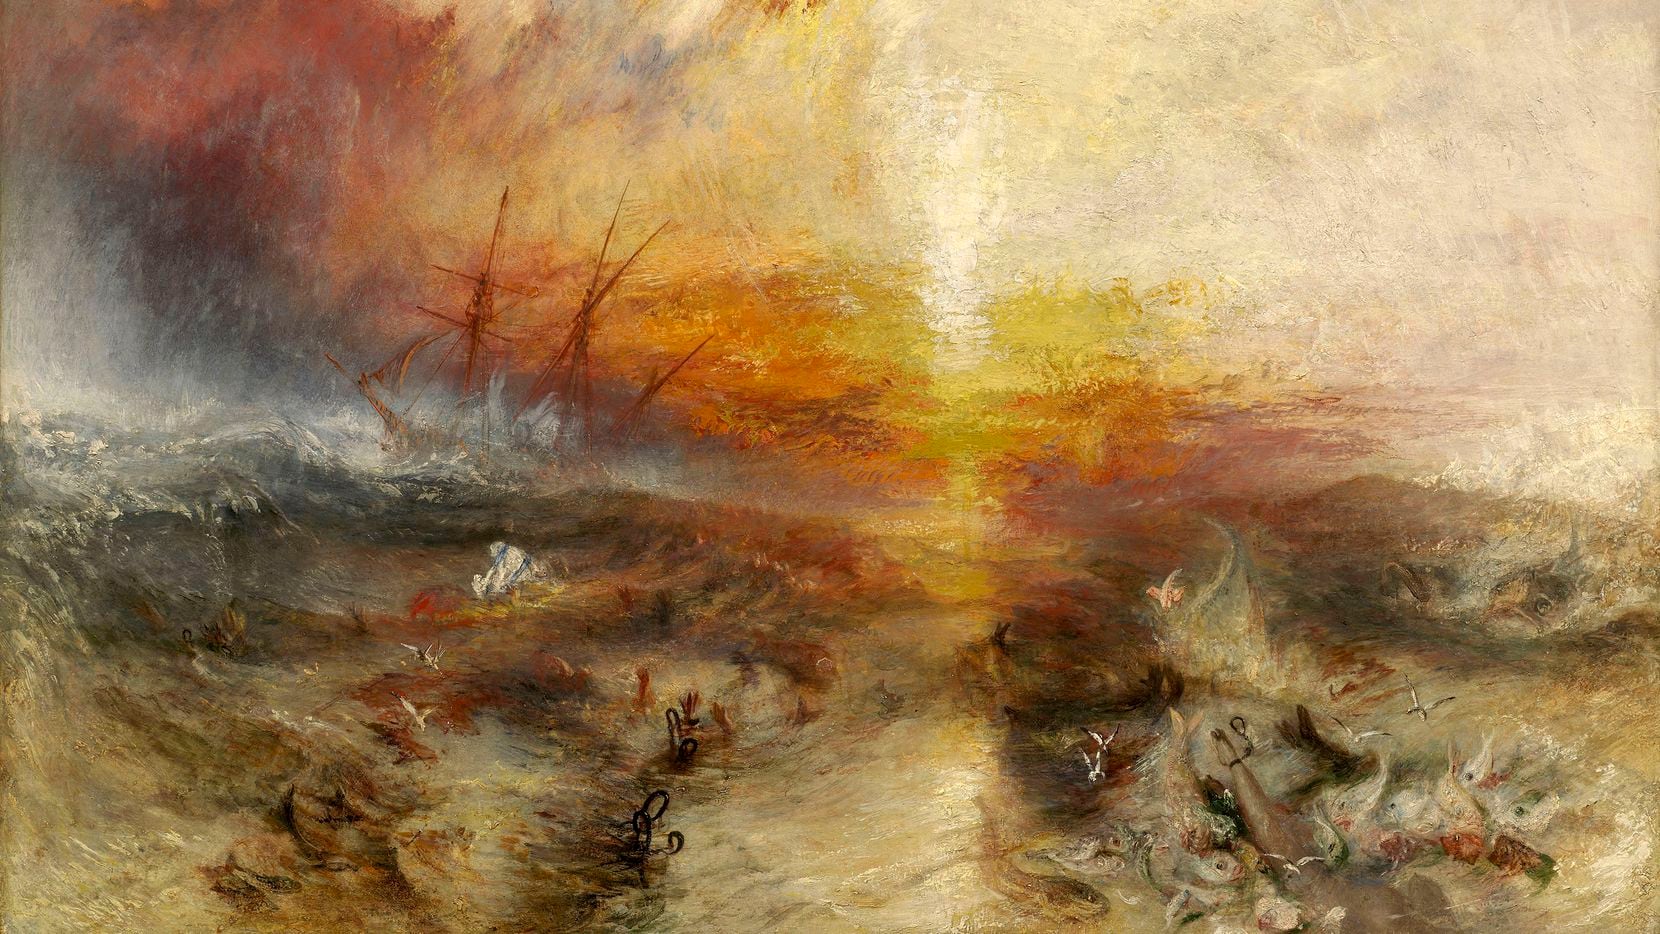 J.M.W. Turner’s 1840 painting "Slave Ship (Slavers Throwing Overboard the Dead and Dying, Typhoon Coming On)" depicts the callous cruelty of the slave trade. (Museum of Fine Arts, Boston. Henry Lillie Pierce Fund. Photograph: Museum of Fine Arts, Boston)